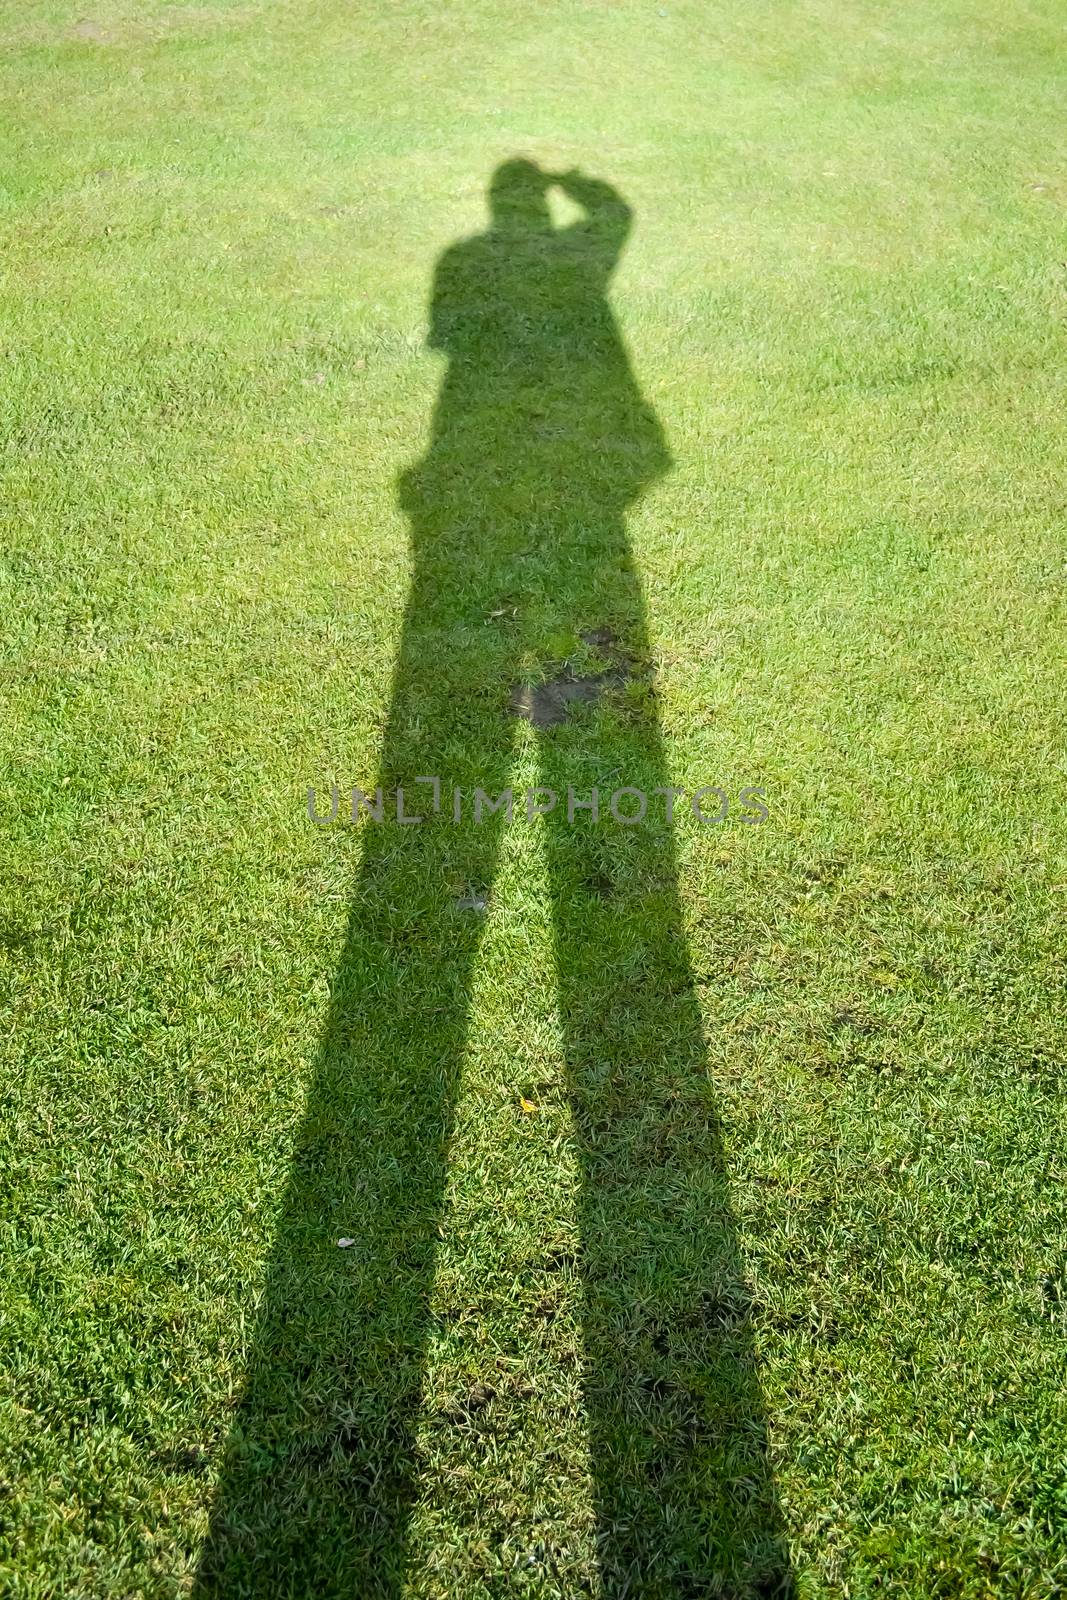 Shadow of a man on a background of green grass illustrates the concept of a photographer.